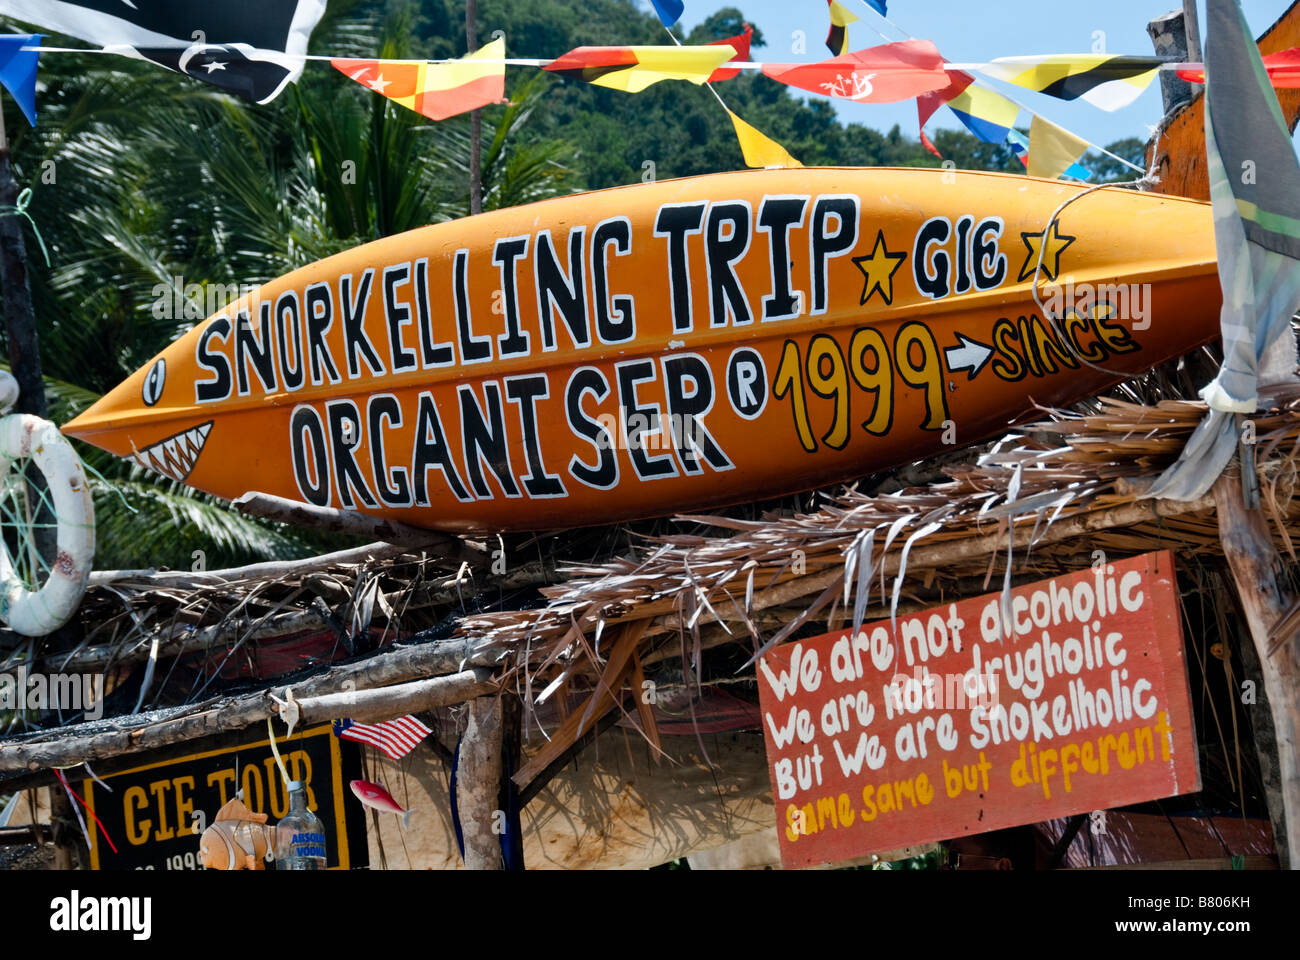 Surfboard advertising snorkeling trips from Long Beach on Perhentian Kecil, Malaysia Stock Photo